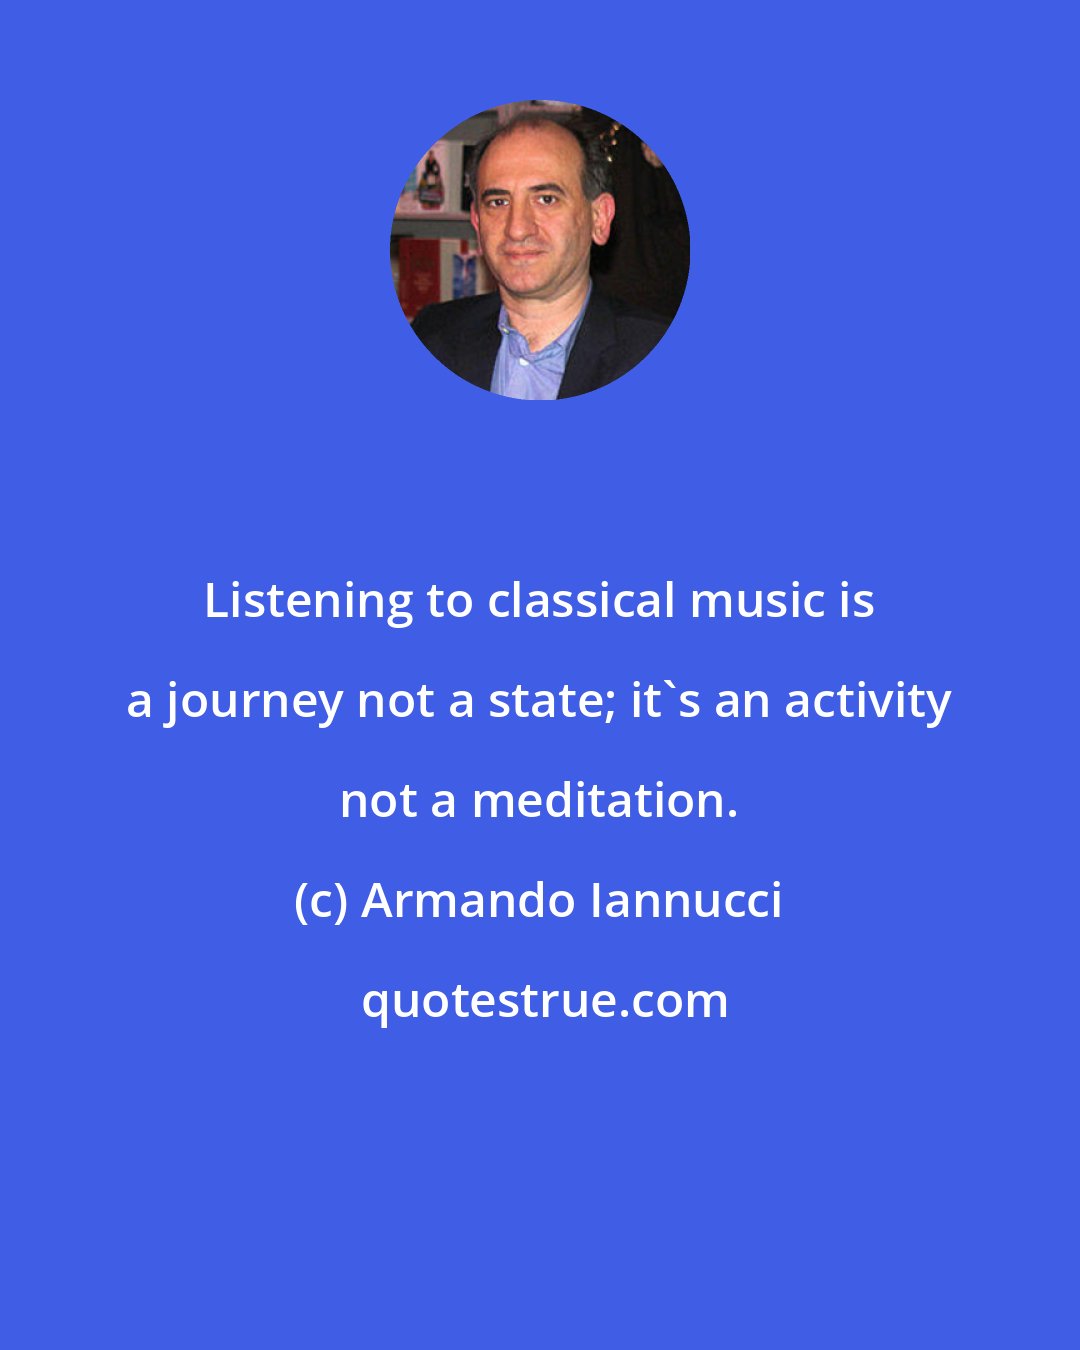 Armando Iannucci: Listening to classical music is a journey not a state; it's an activity not a meditation.